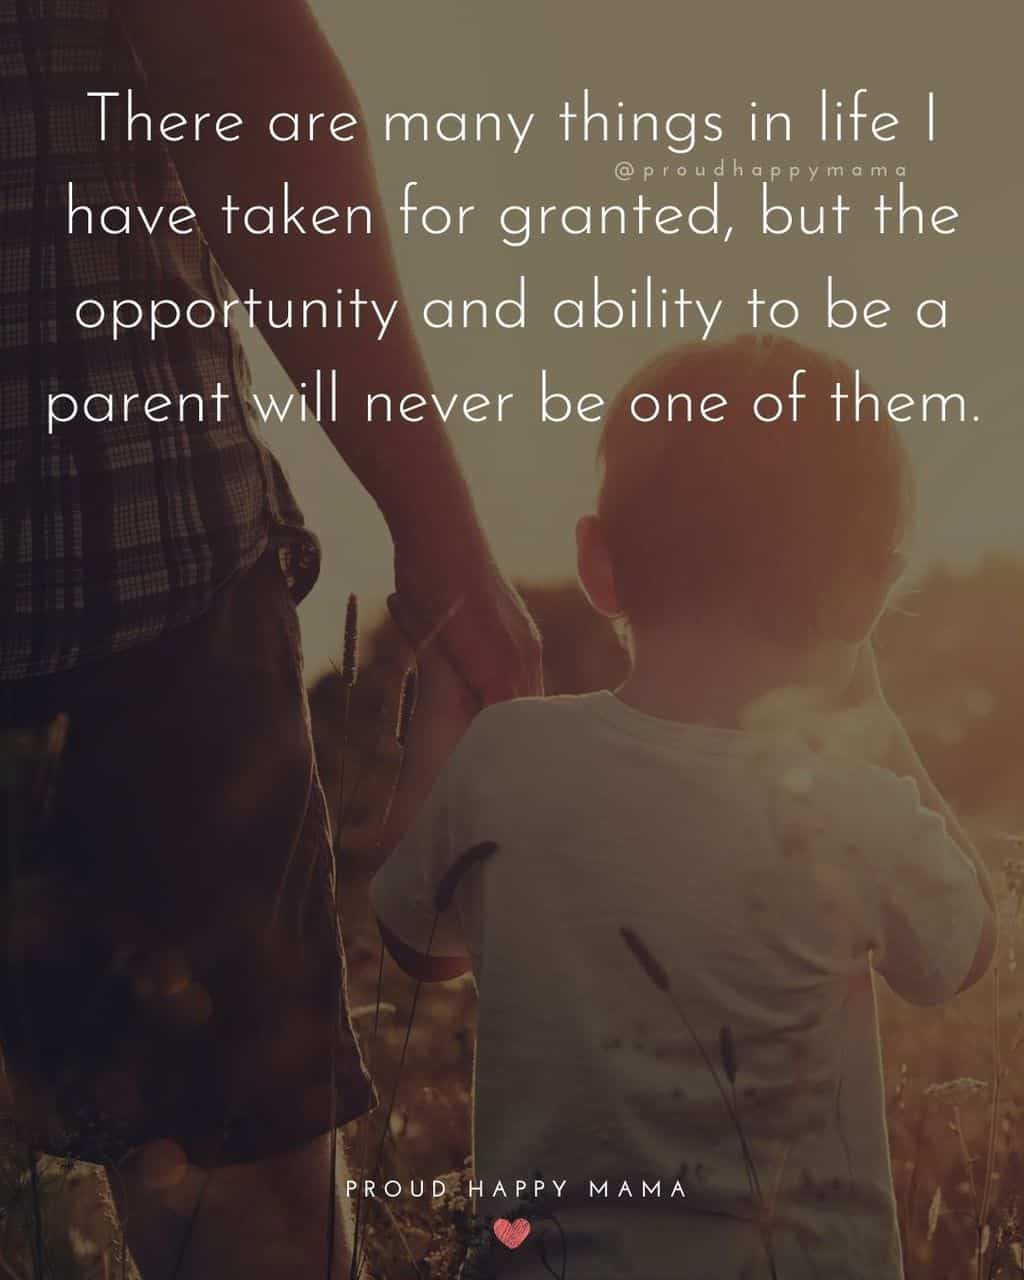 Parenting Quotes - There are many things in life I have taken for granted, but the opportunity and ability to be a parent will never be